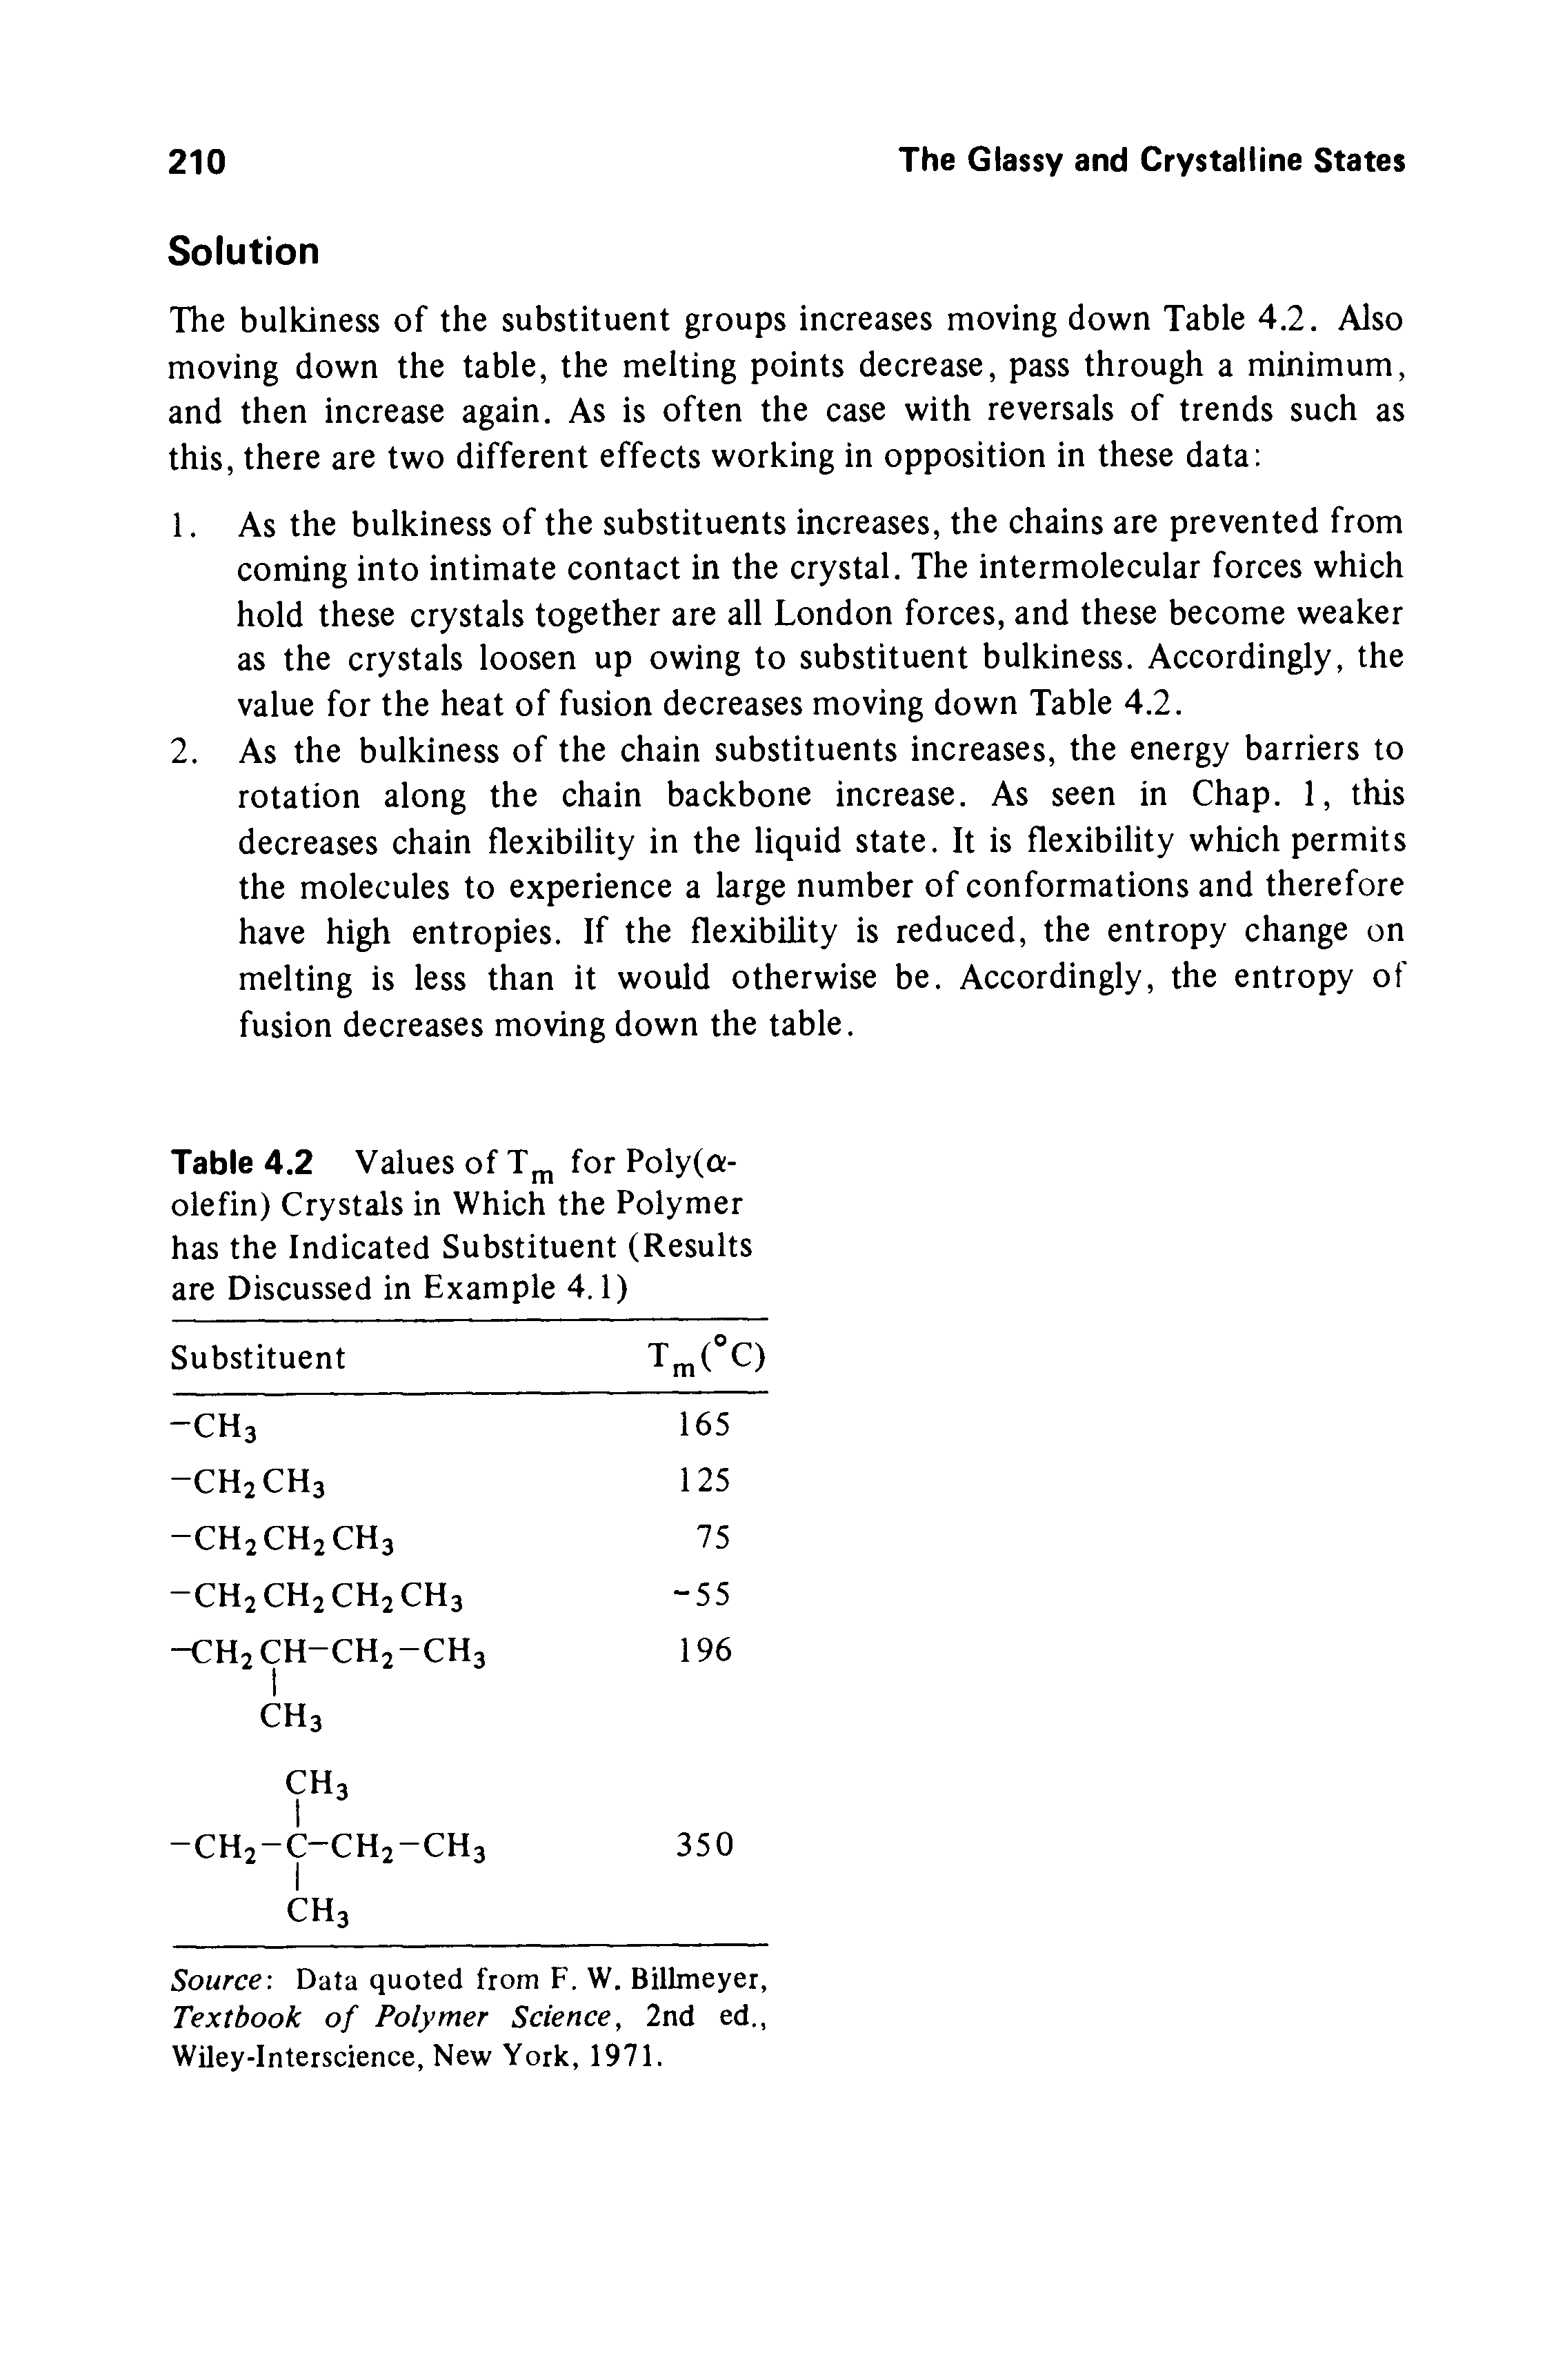 Table 4.2 Values of T j, for Poly(a-olefin) Crystals in Which the Polymer has the Indicated Substituent (Results are Discussed in Example 4.1)...